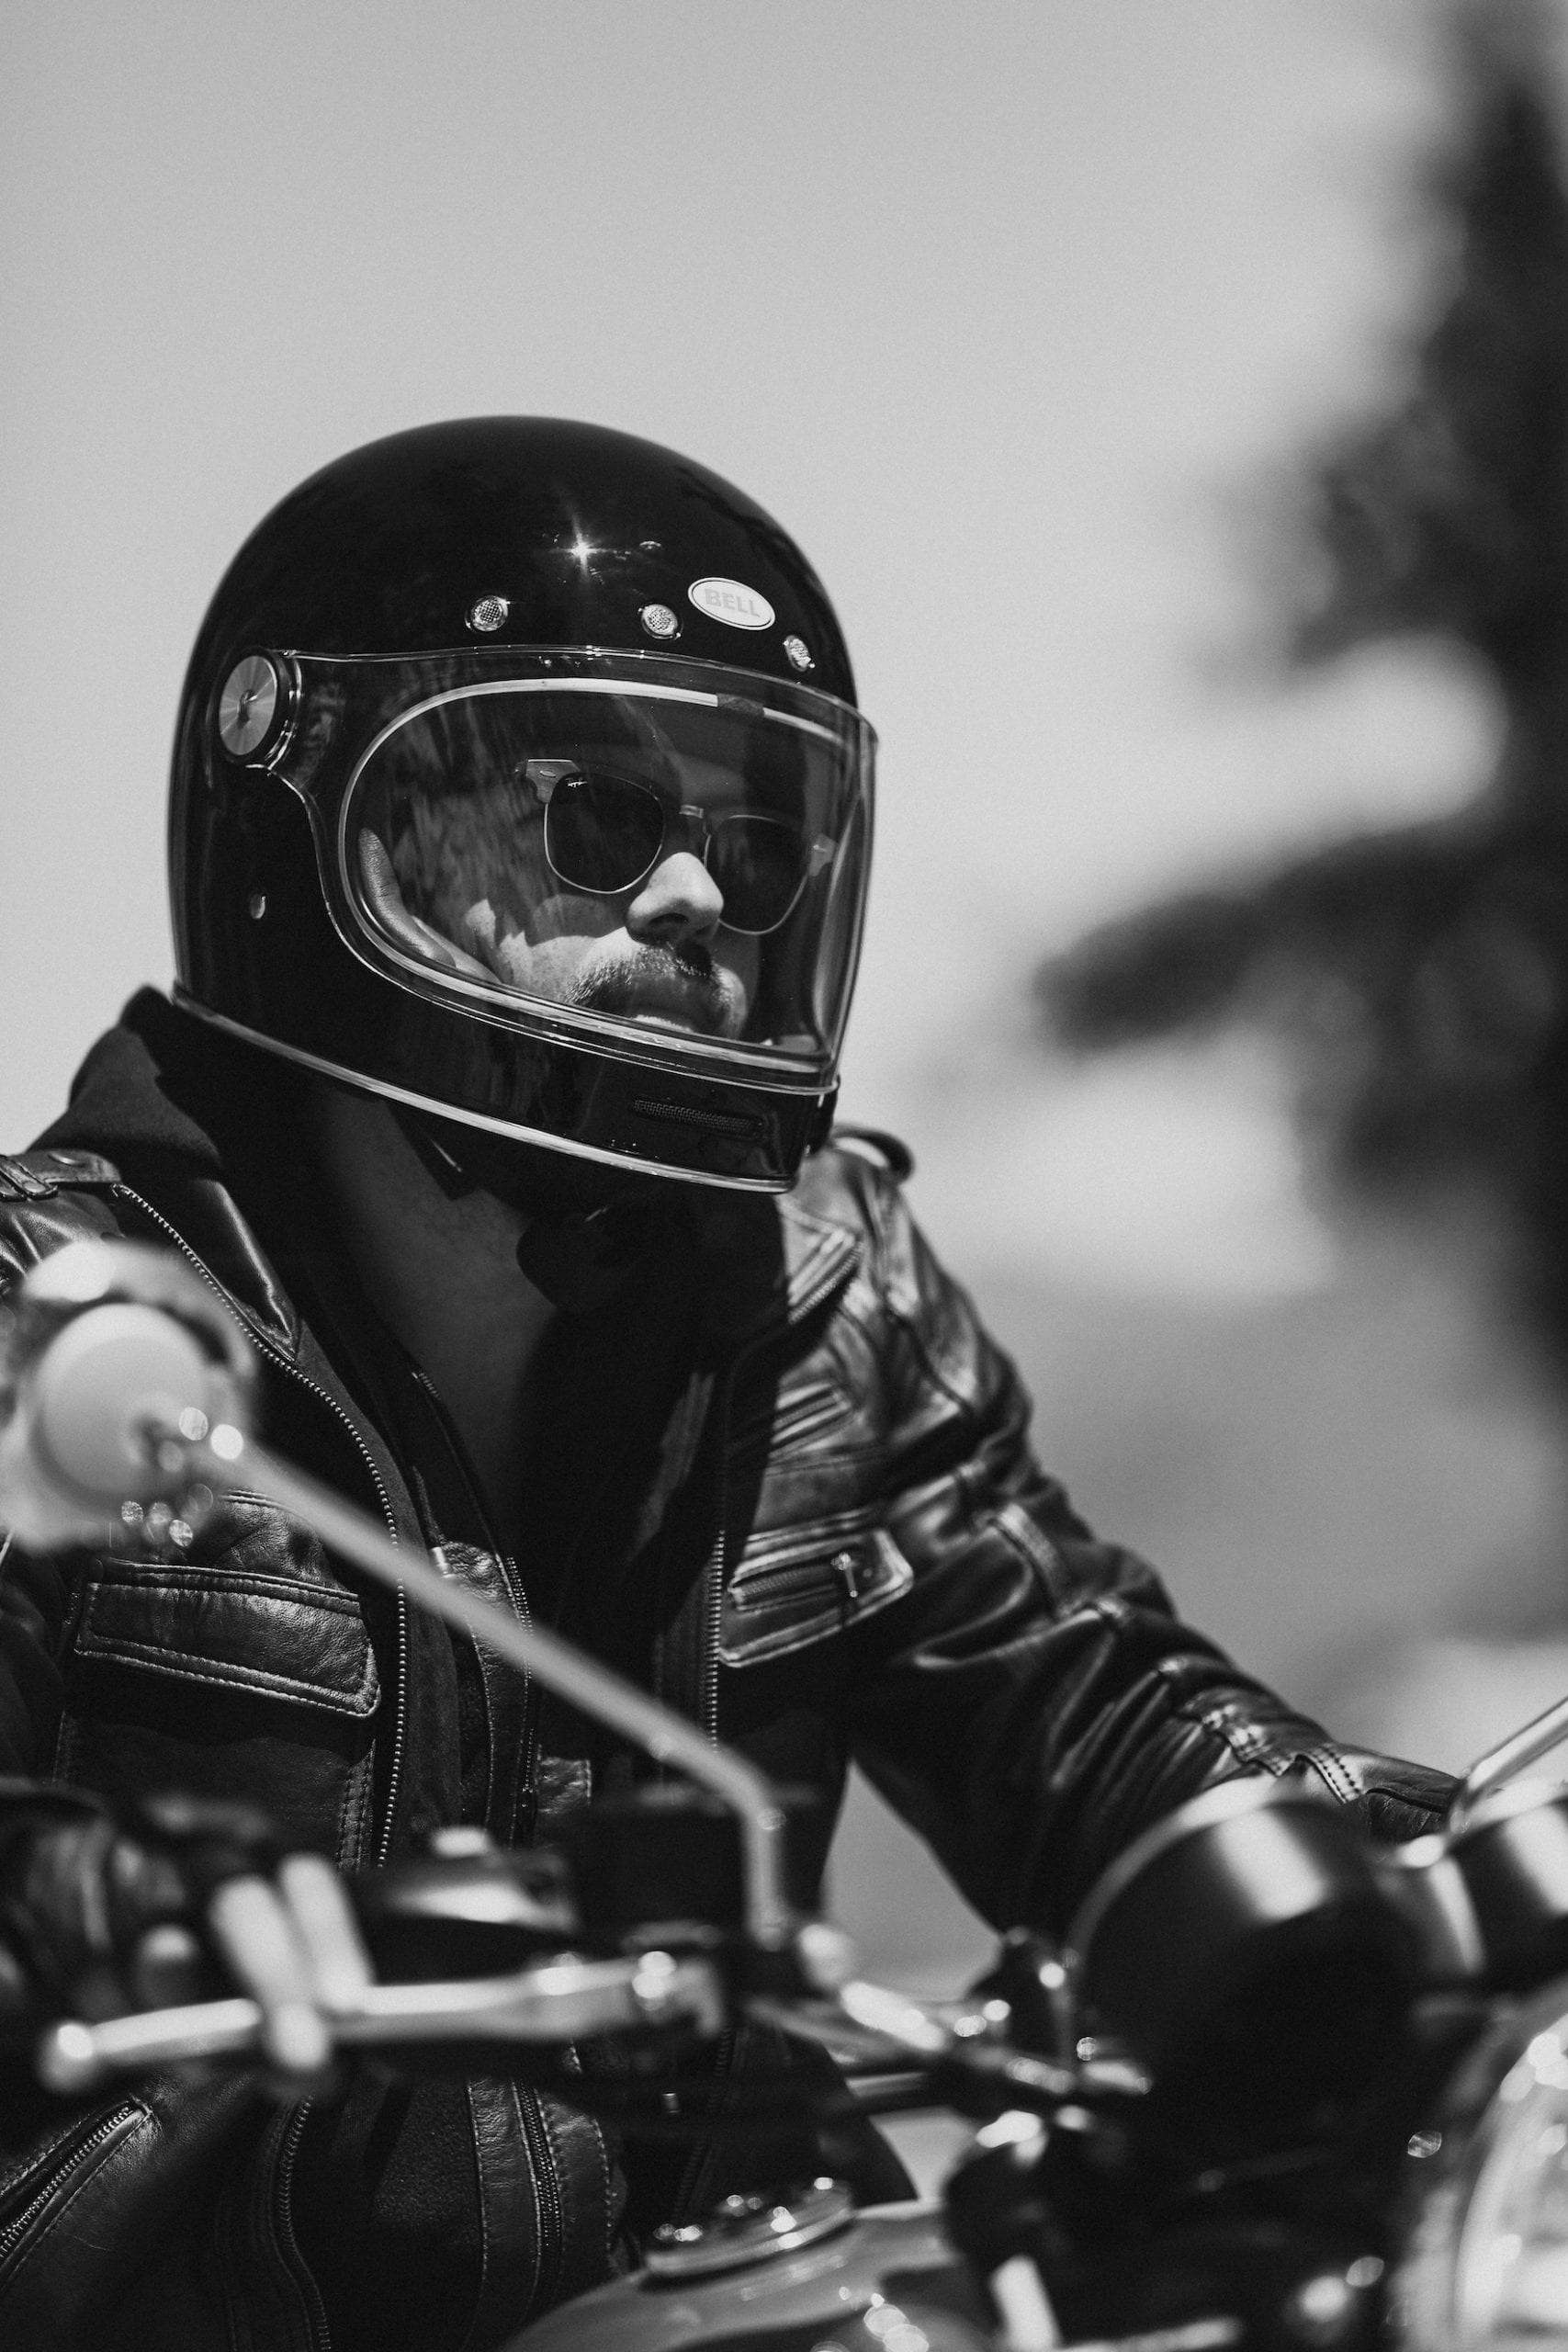 Triumph Motorcycles Euro Bike Shoot Black and white closeup of the motorcycle rider on his motorcycle